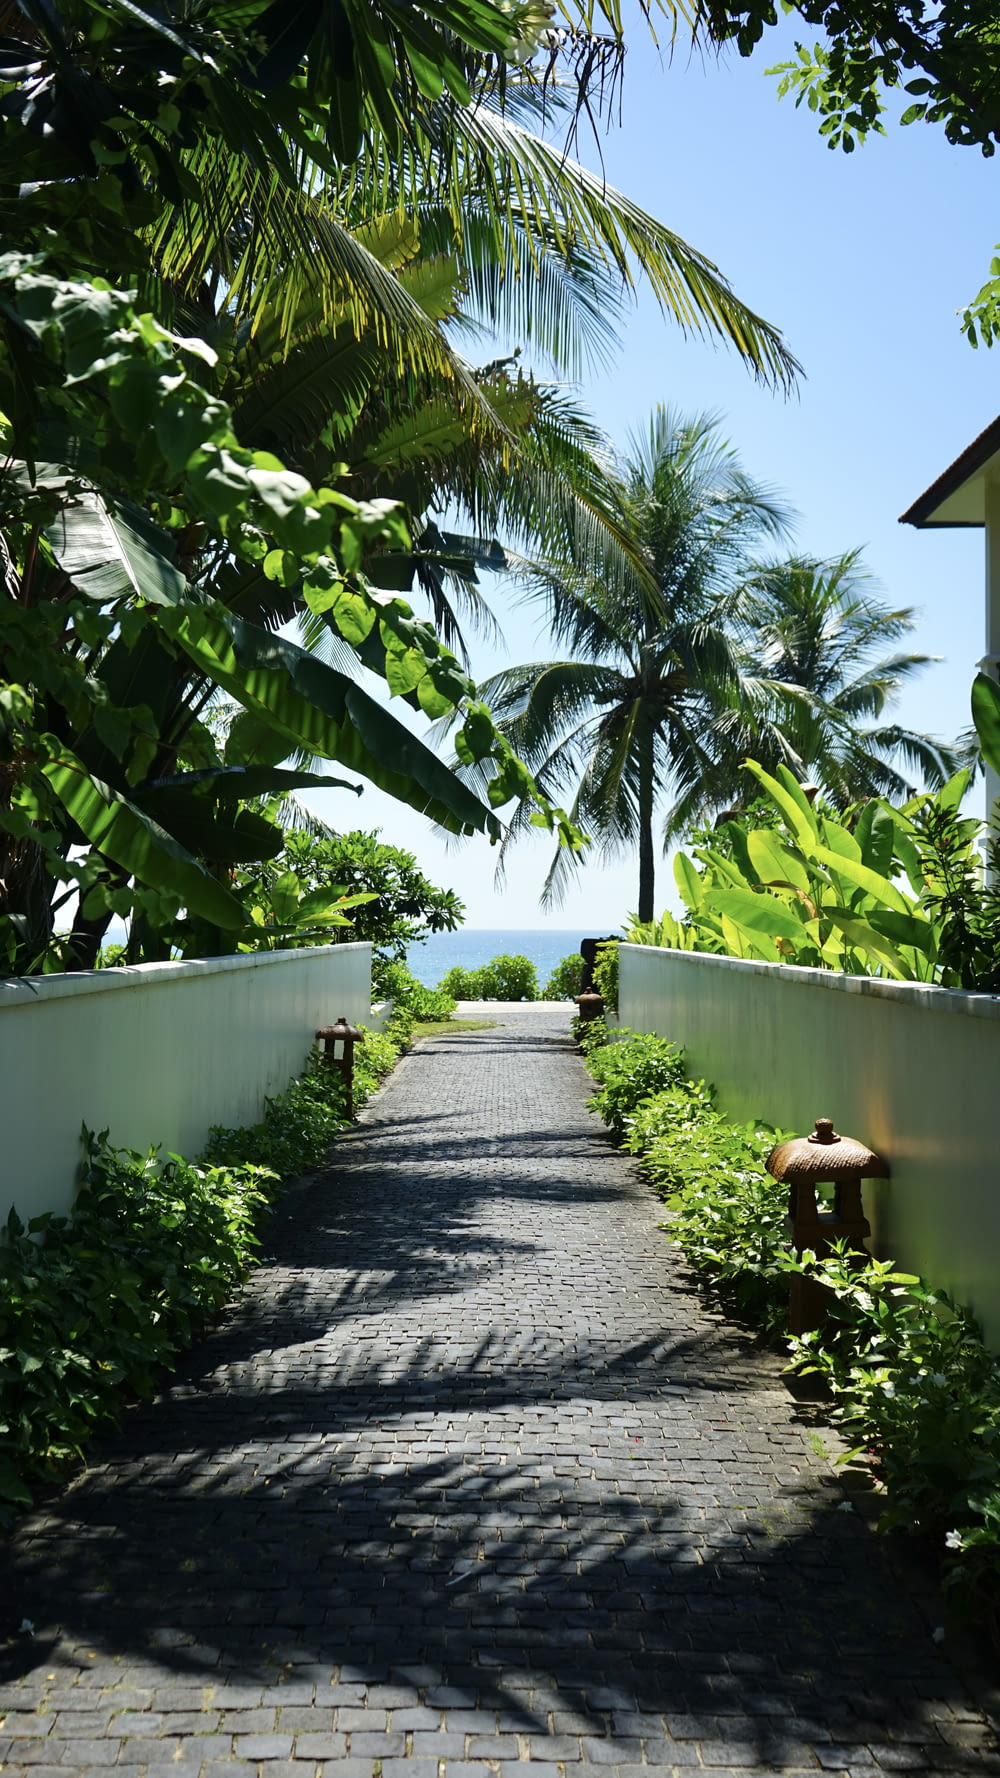 a stone pathway with palm trees and a body of water in the background